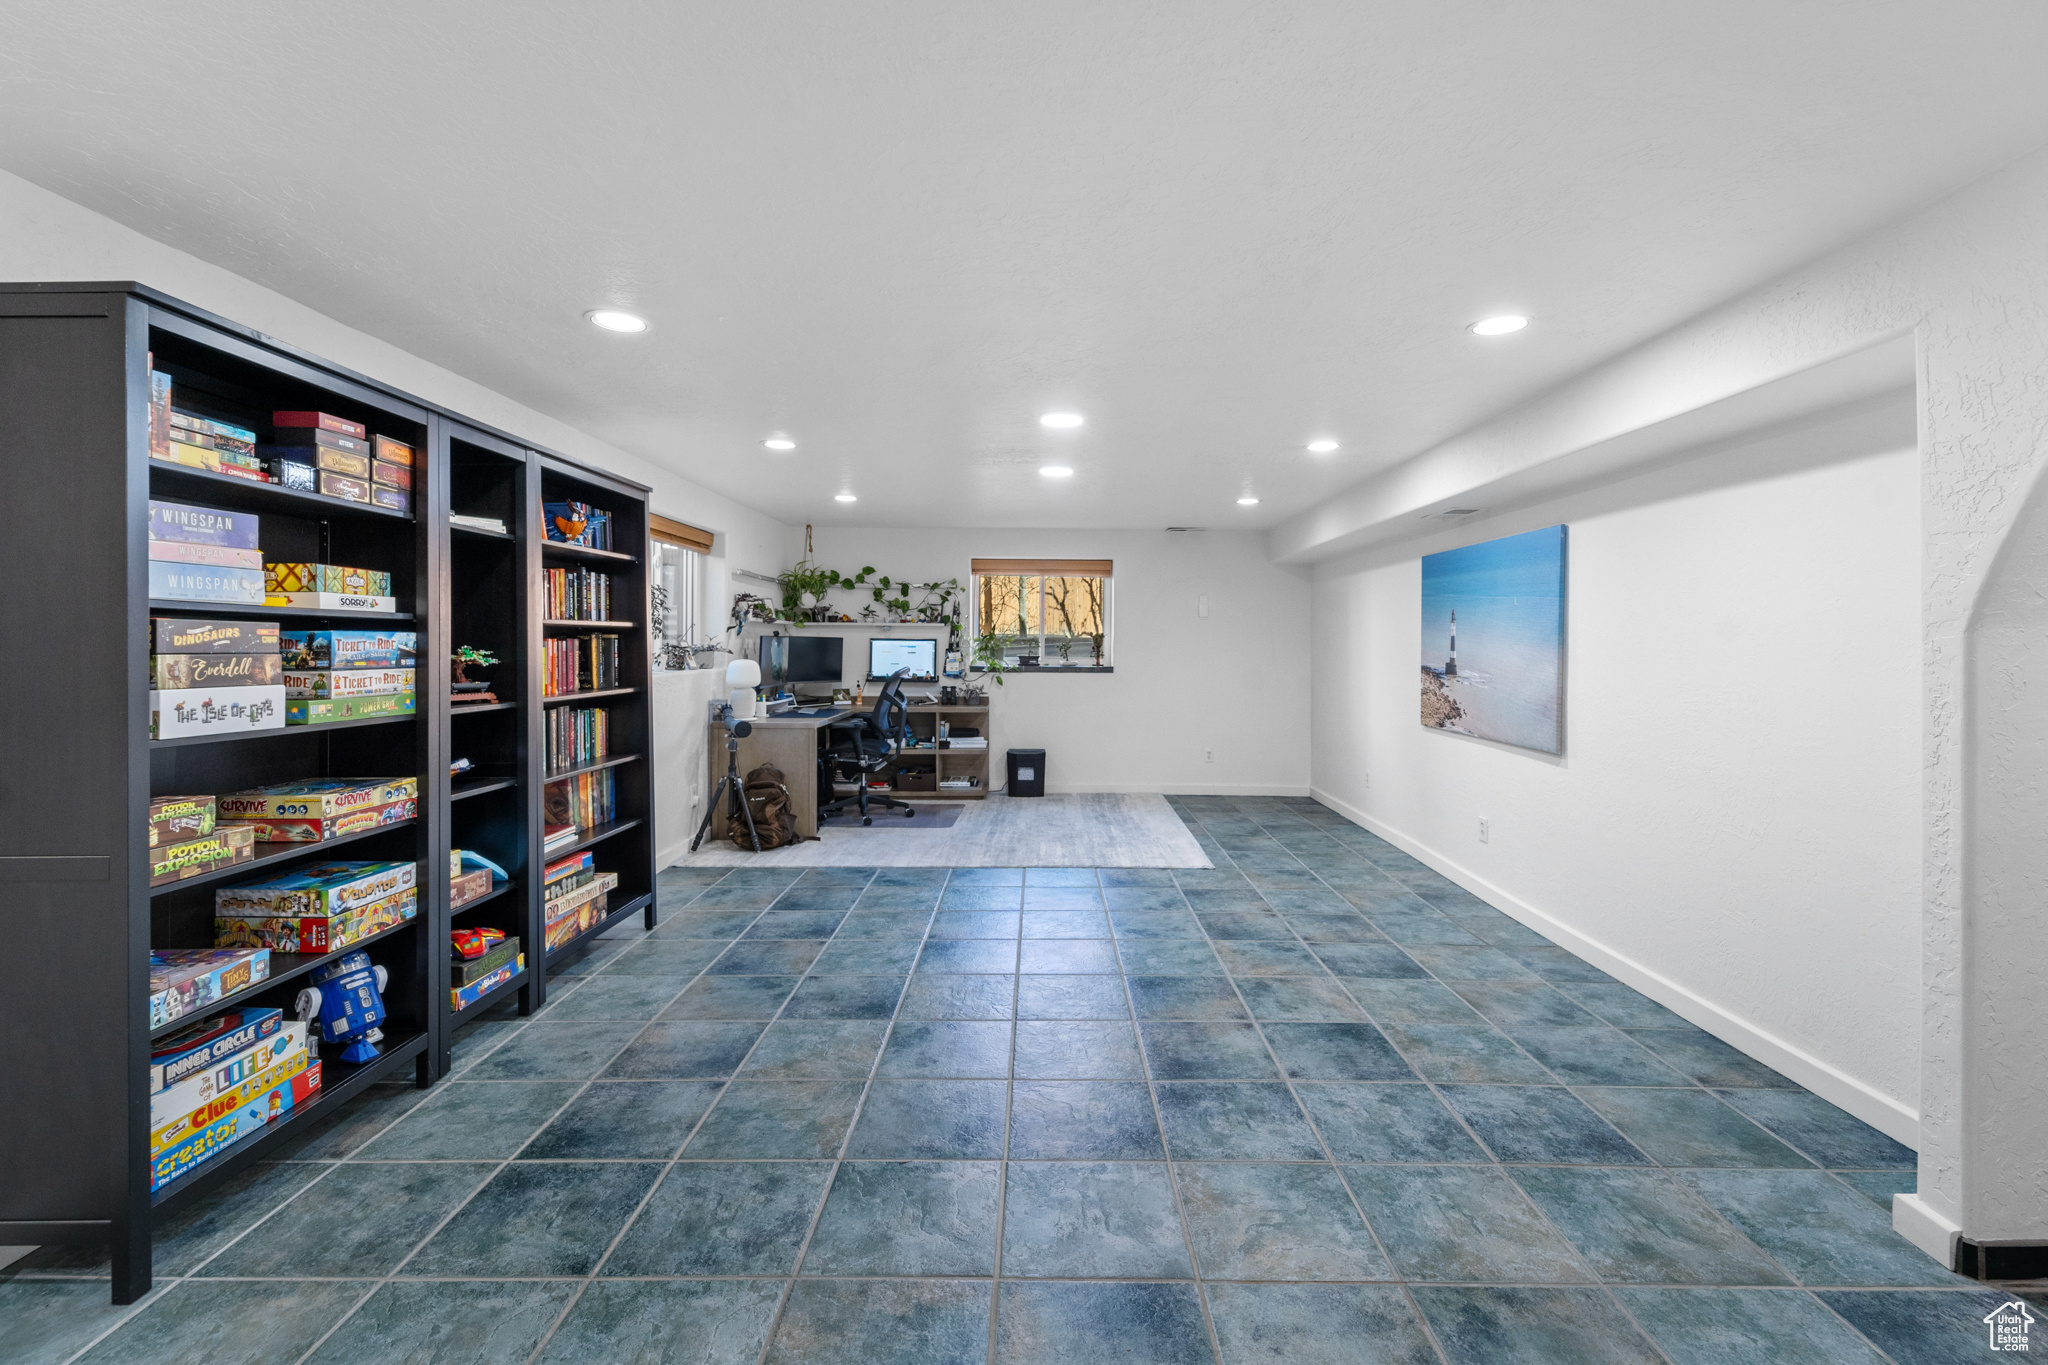 Second family or game room with plenty of light and a wet bar area. Lots of space for whatever you will need :)